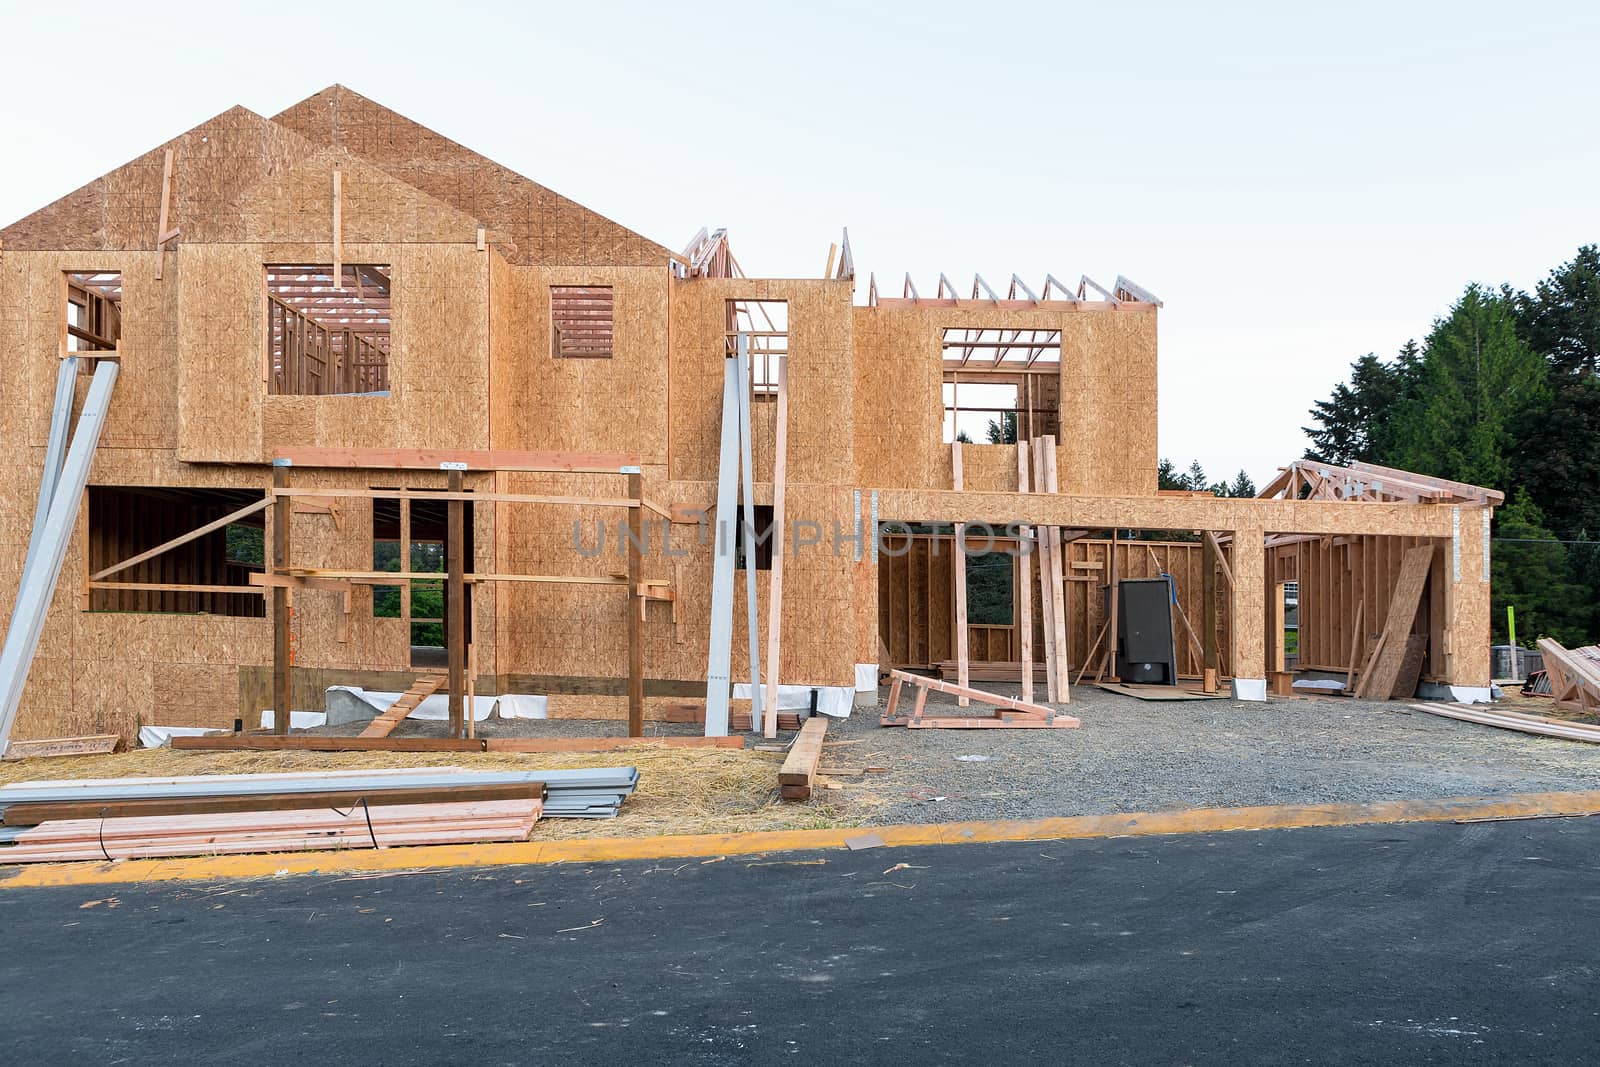 New Single Family Home Construction in New North American Subdivision